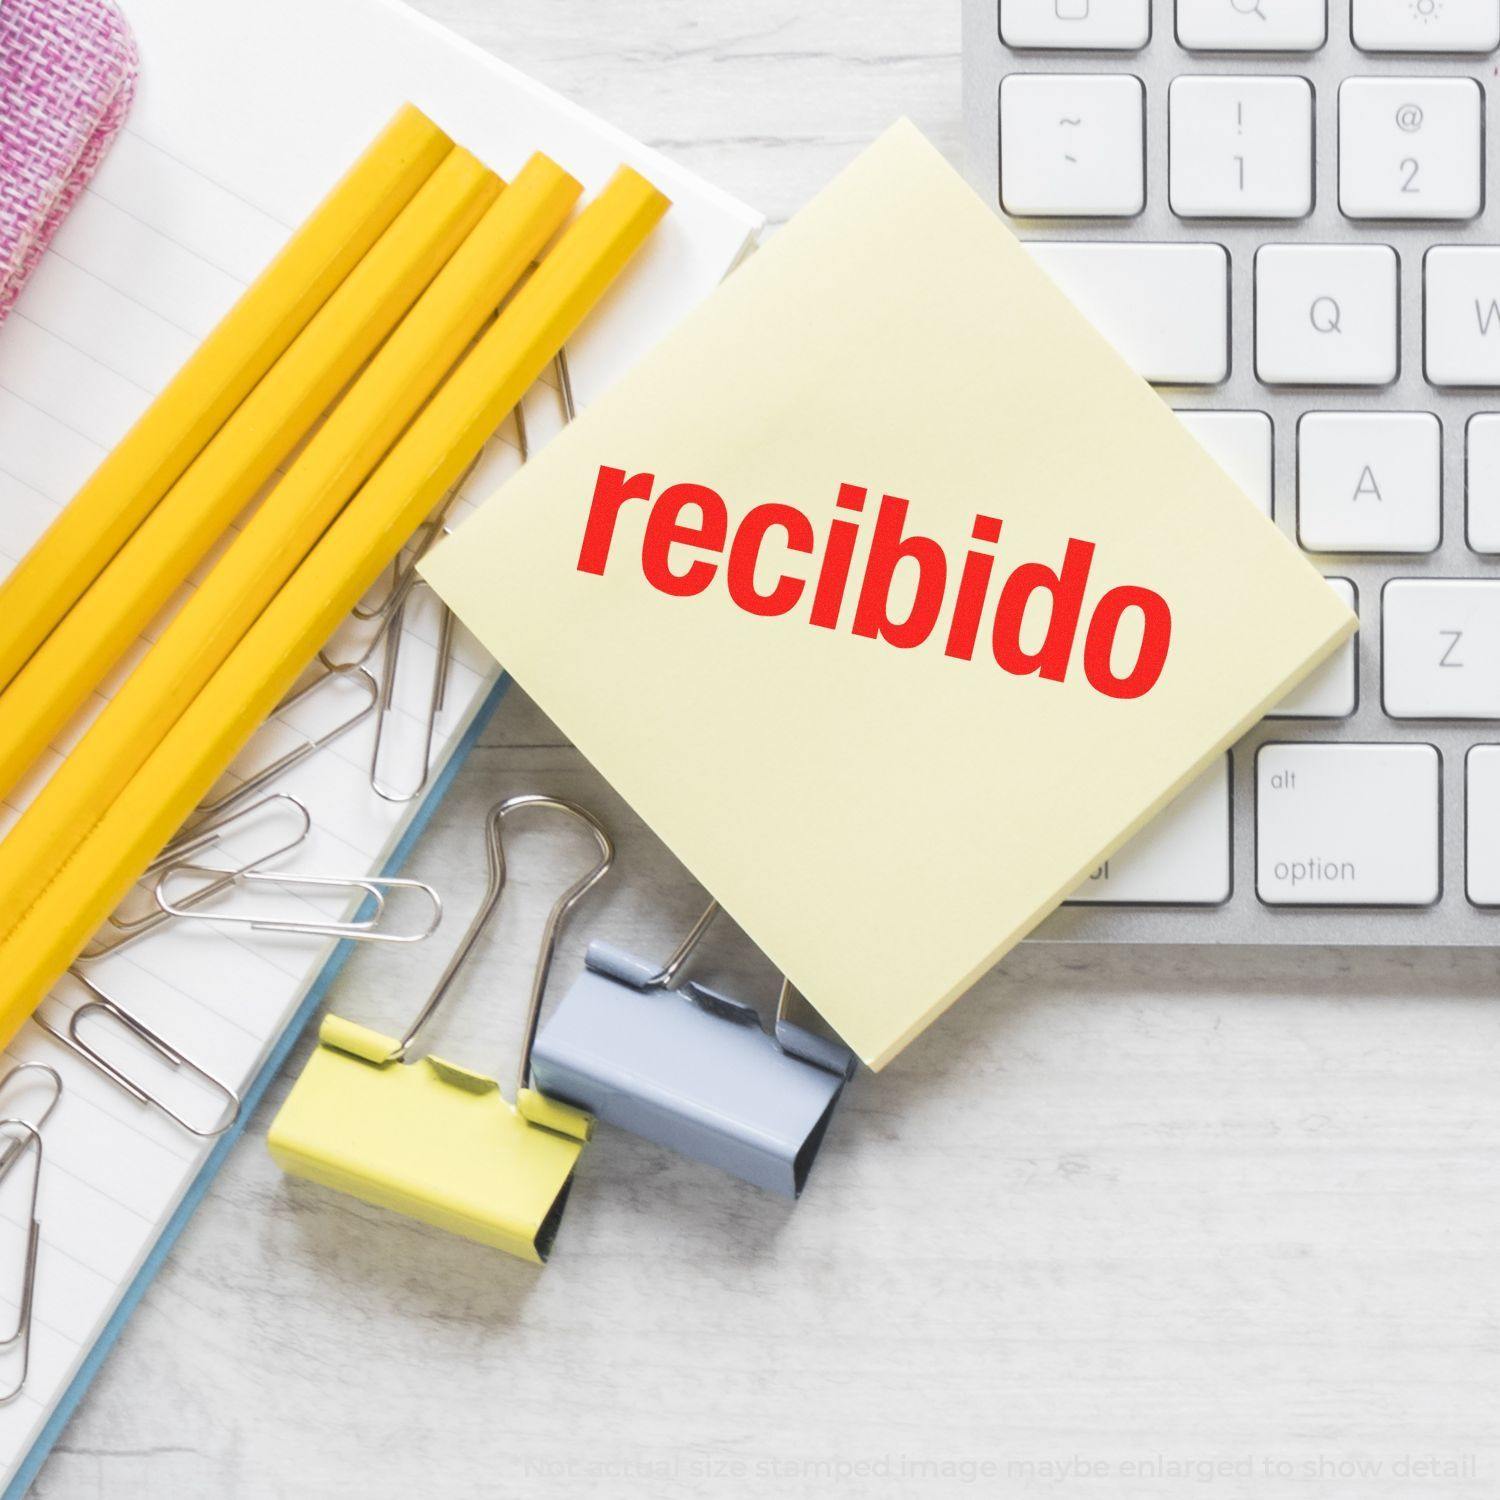 A self-inking stamp with a stamped image showing how the text "recibido" in a large bold font is displayed by it after stamping.